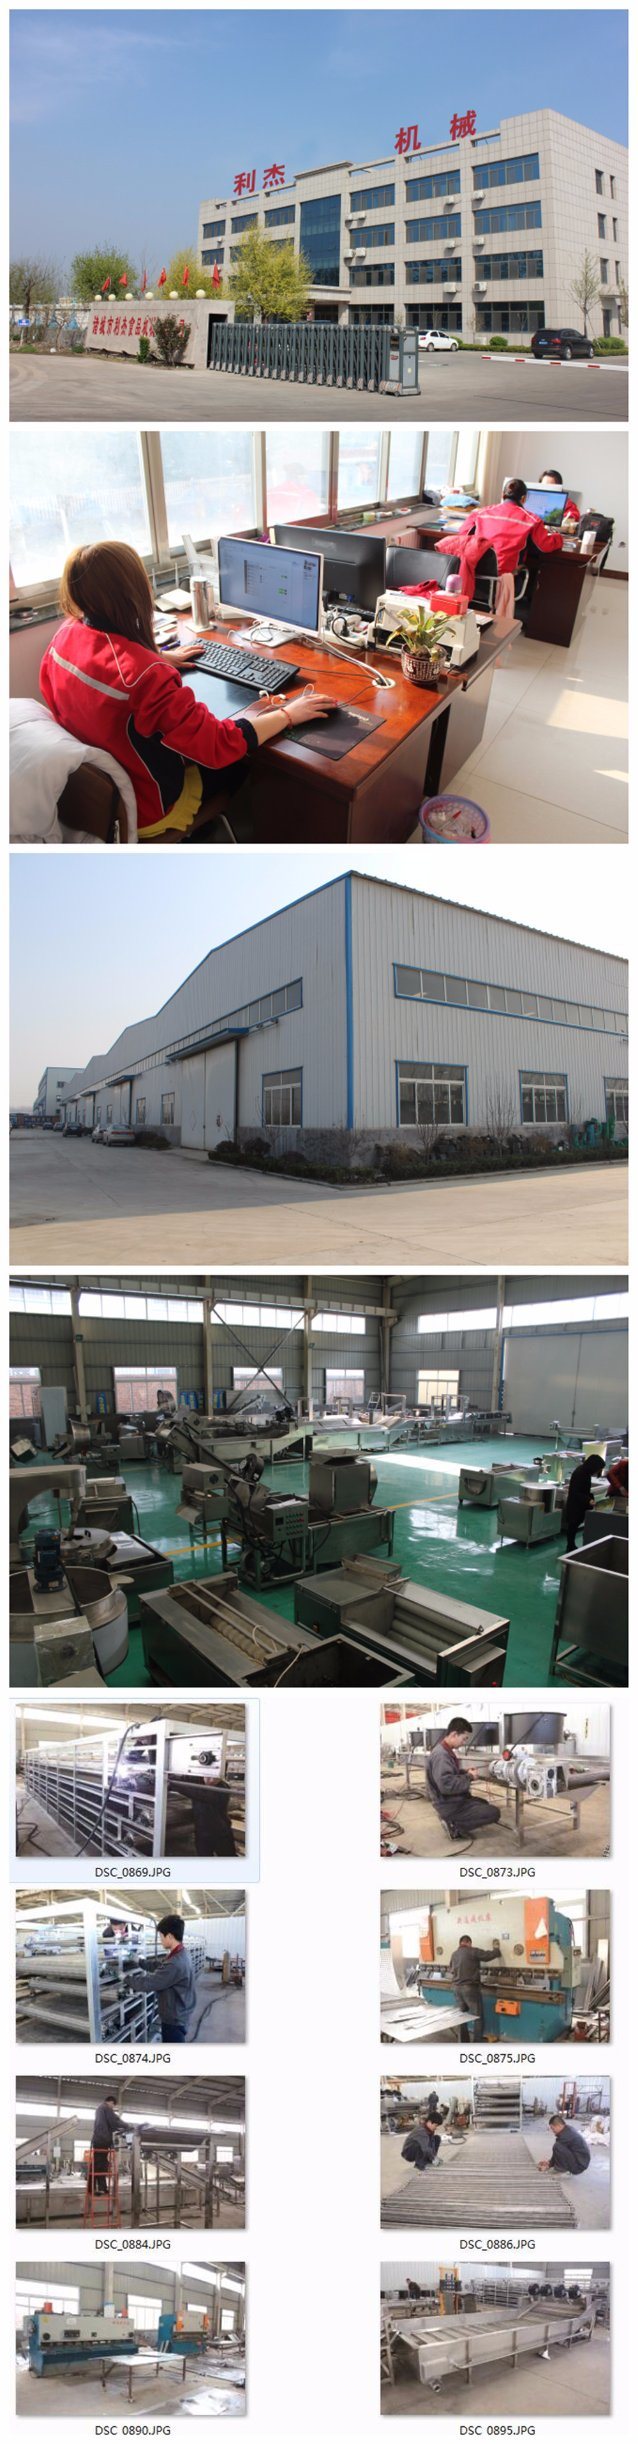 Commercial Electric Fryer Stainless Steel Potato Chips Production Line